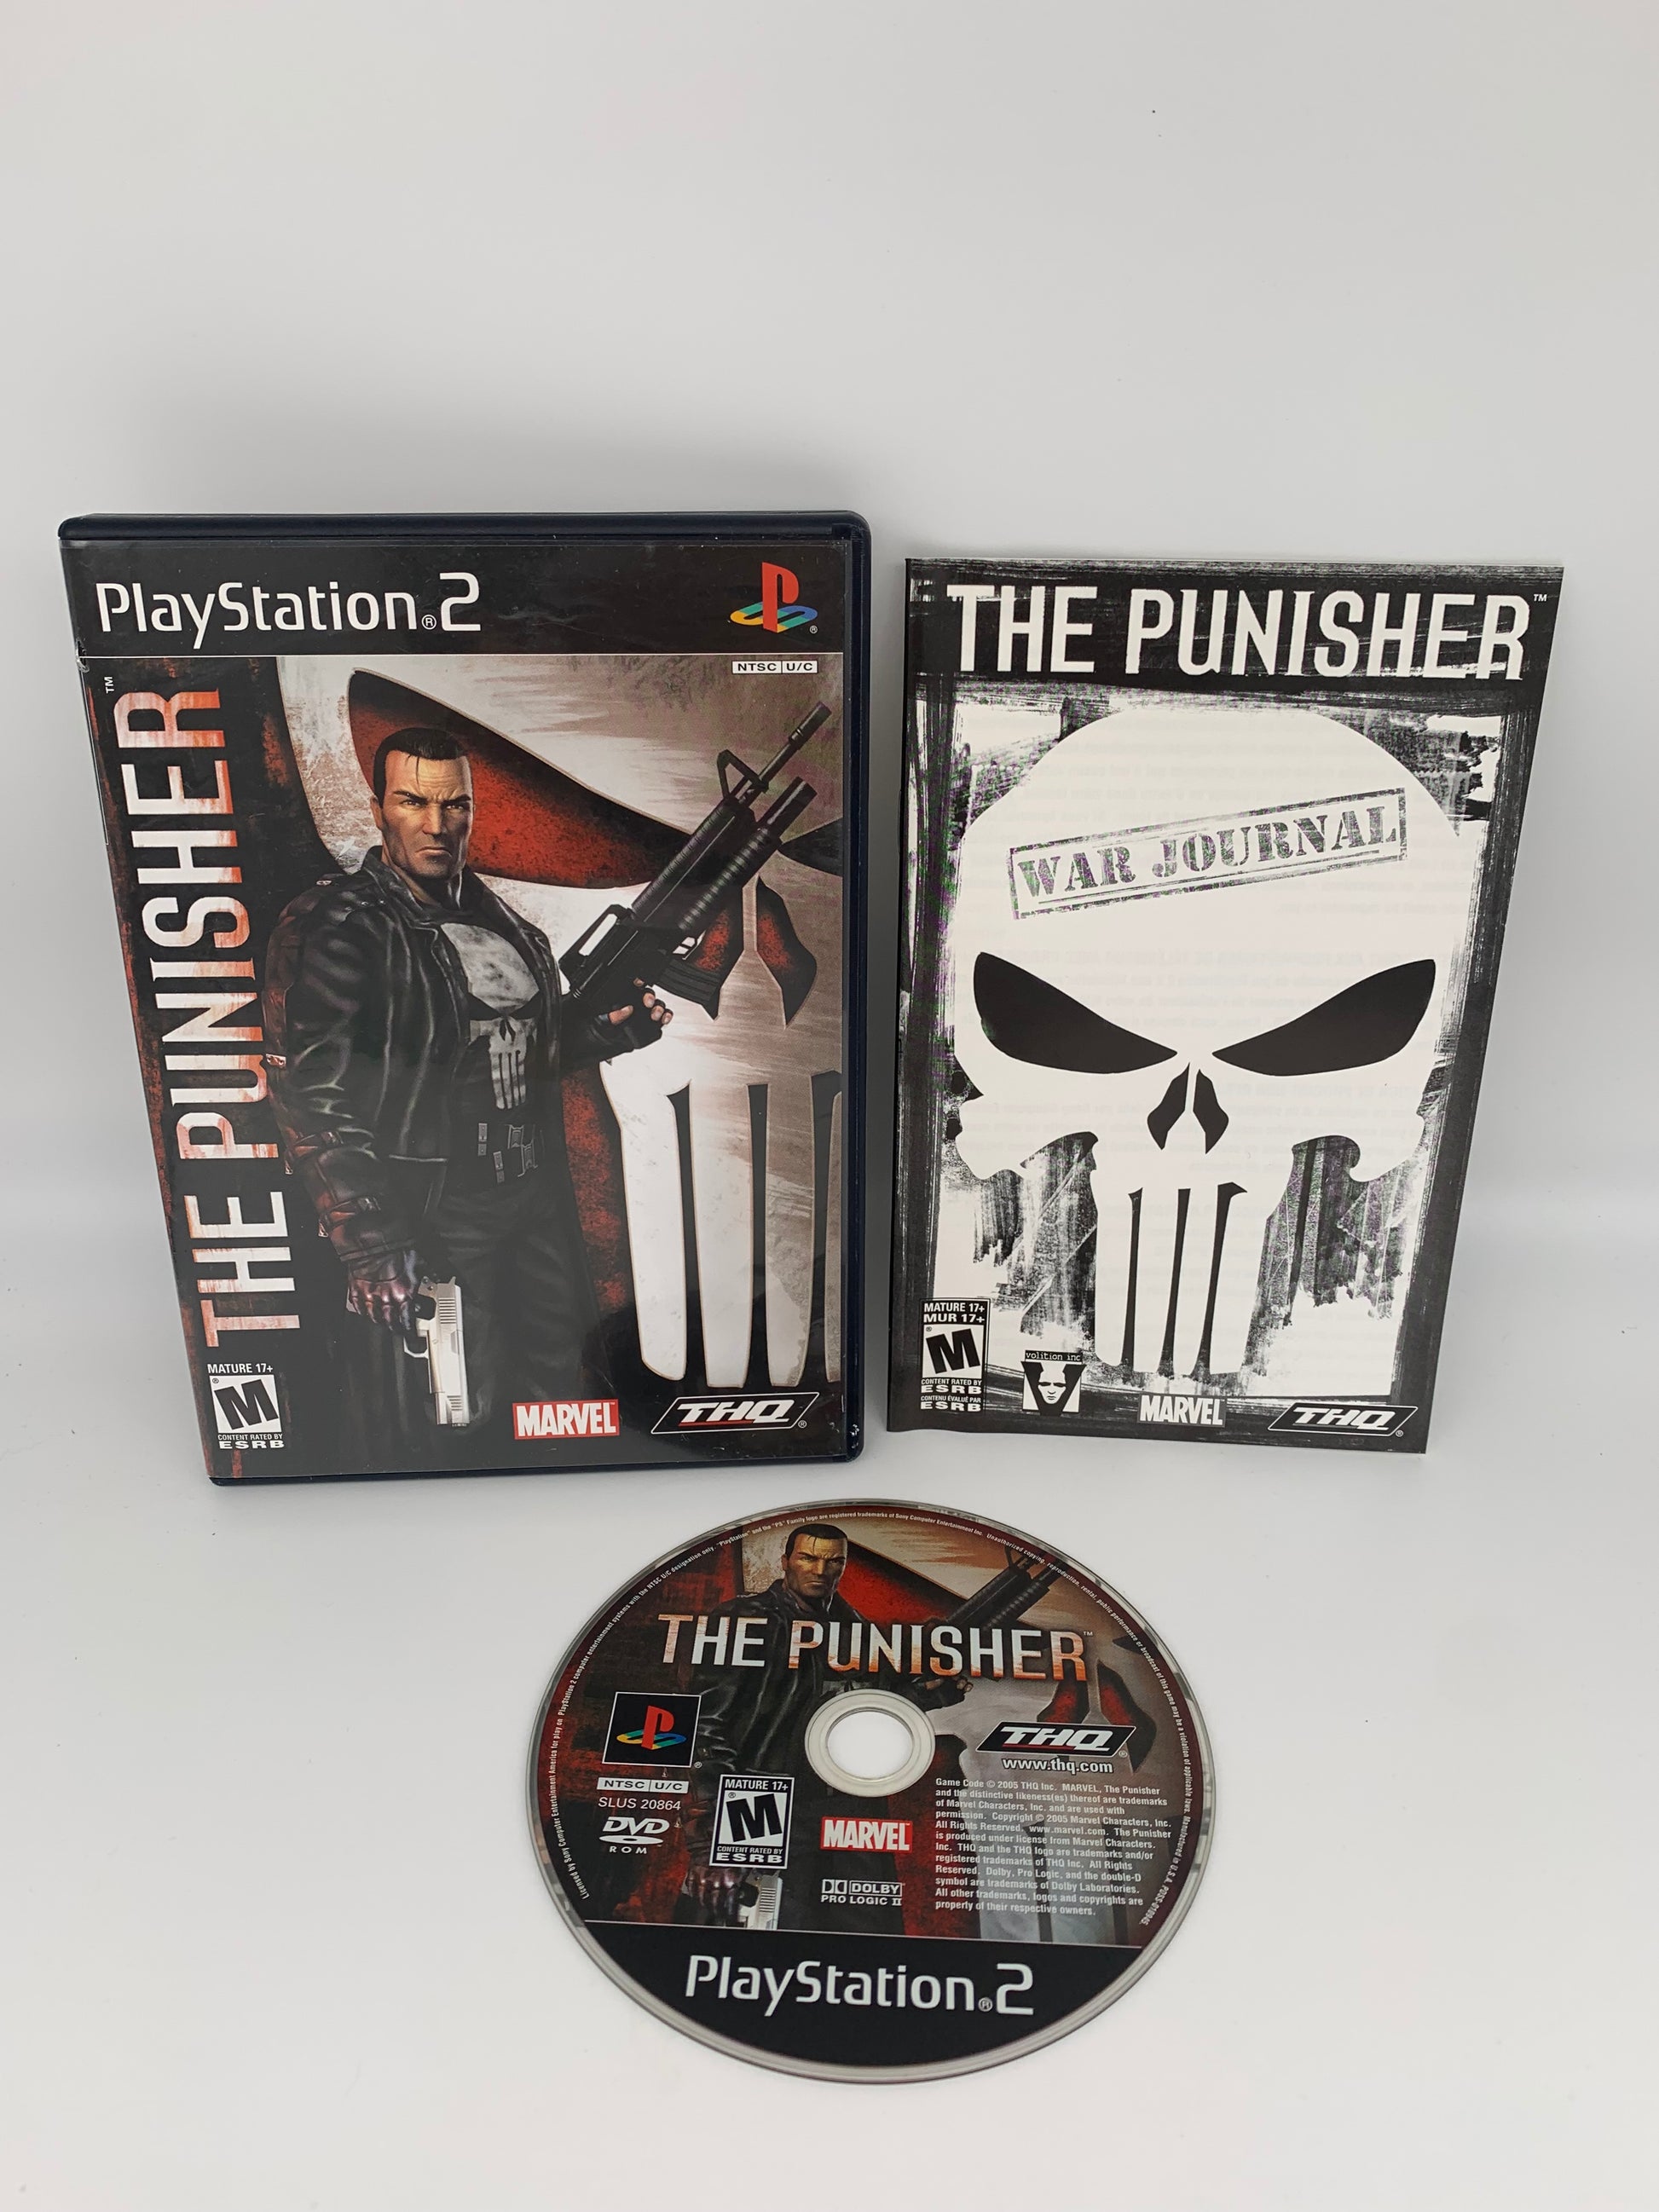 PiXEL-RETRO.COM : SONY PLAYSTATION 2 (PS2) COMPLET CIB BOX MANUAL GAME NTSC THE PUNISHER